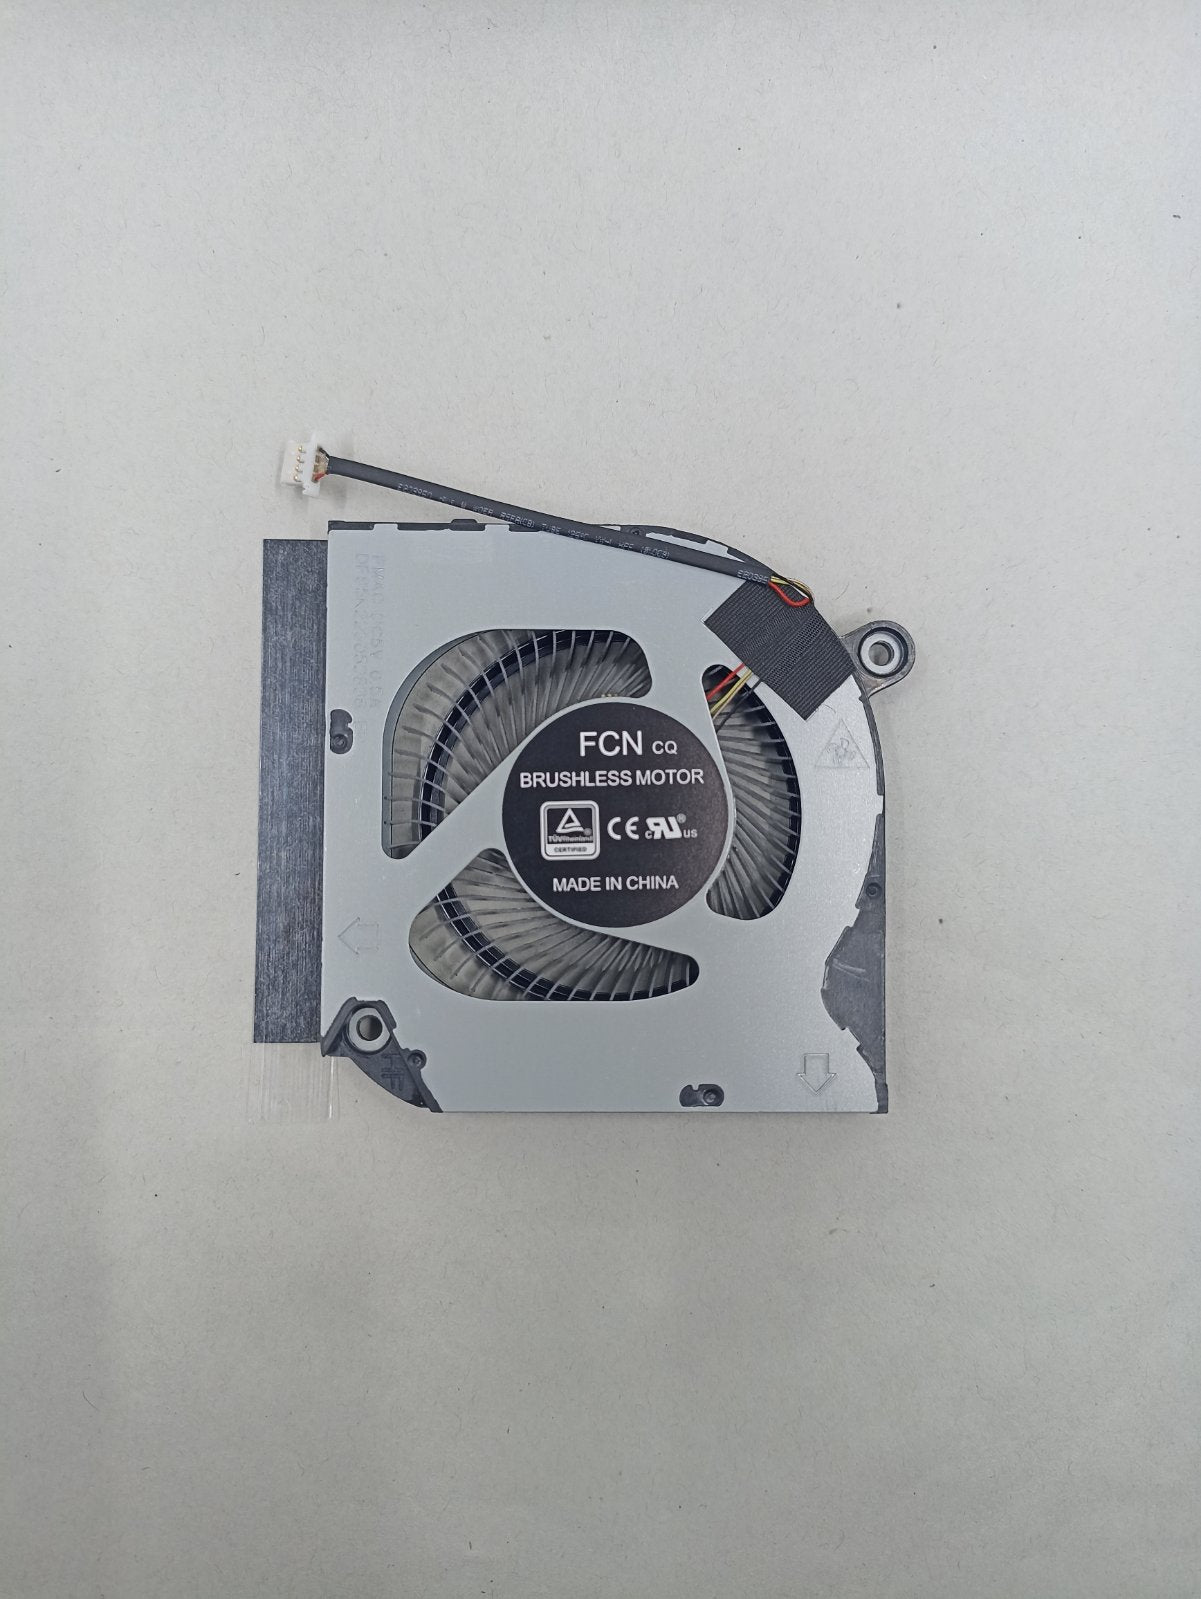 Replacement Fan for Acer AN515-57 WL